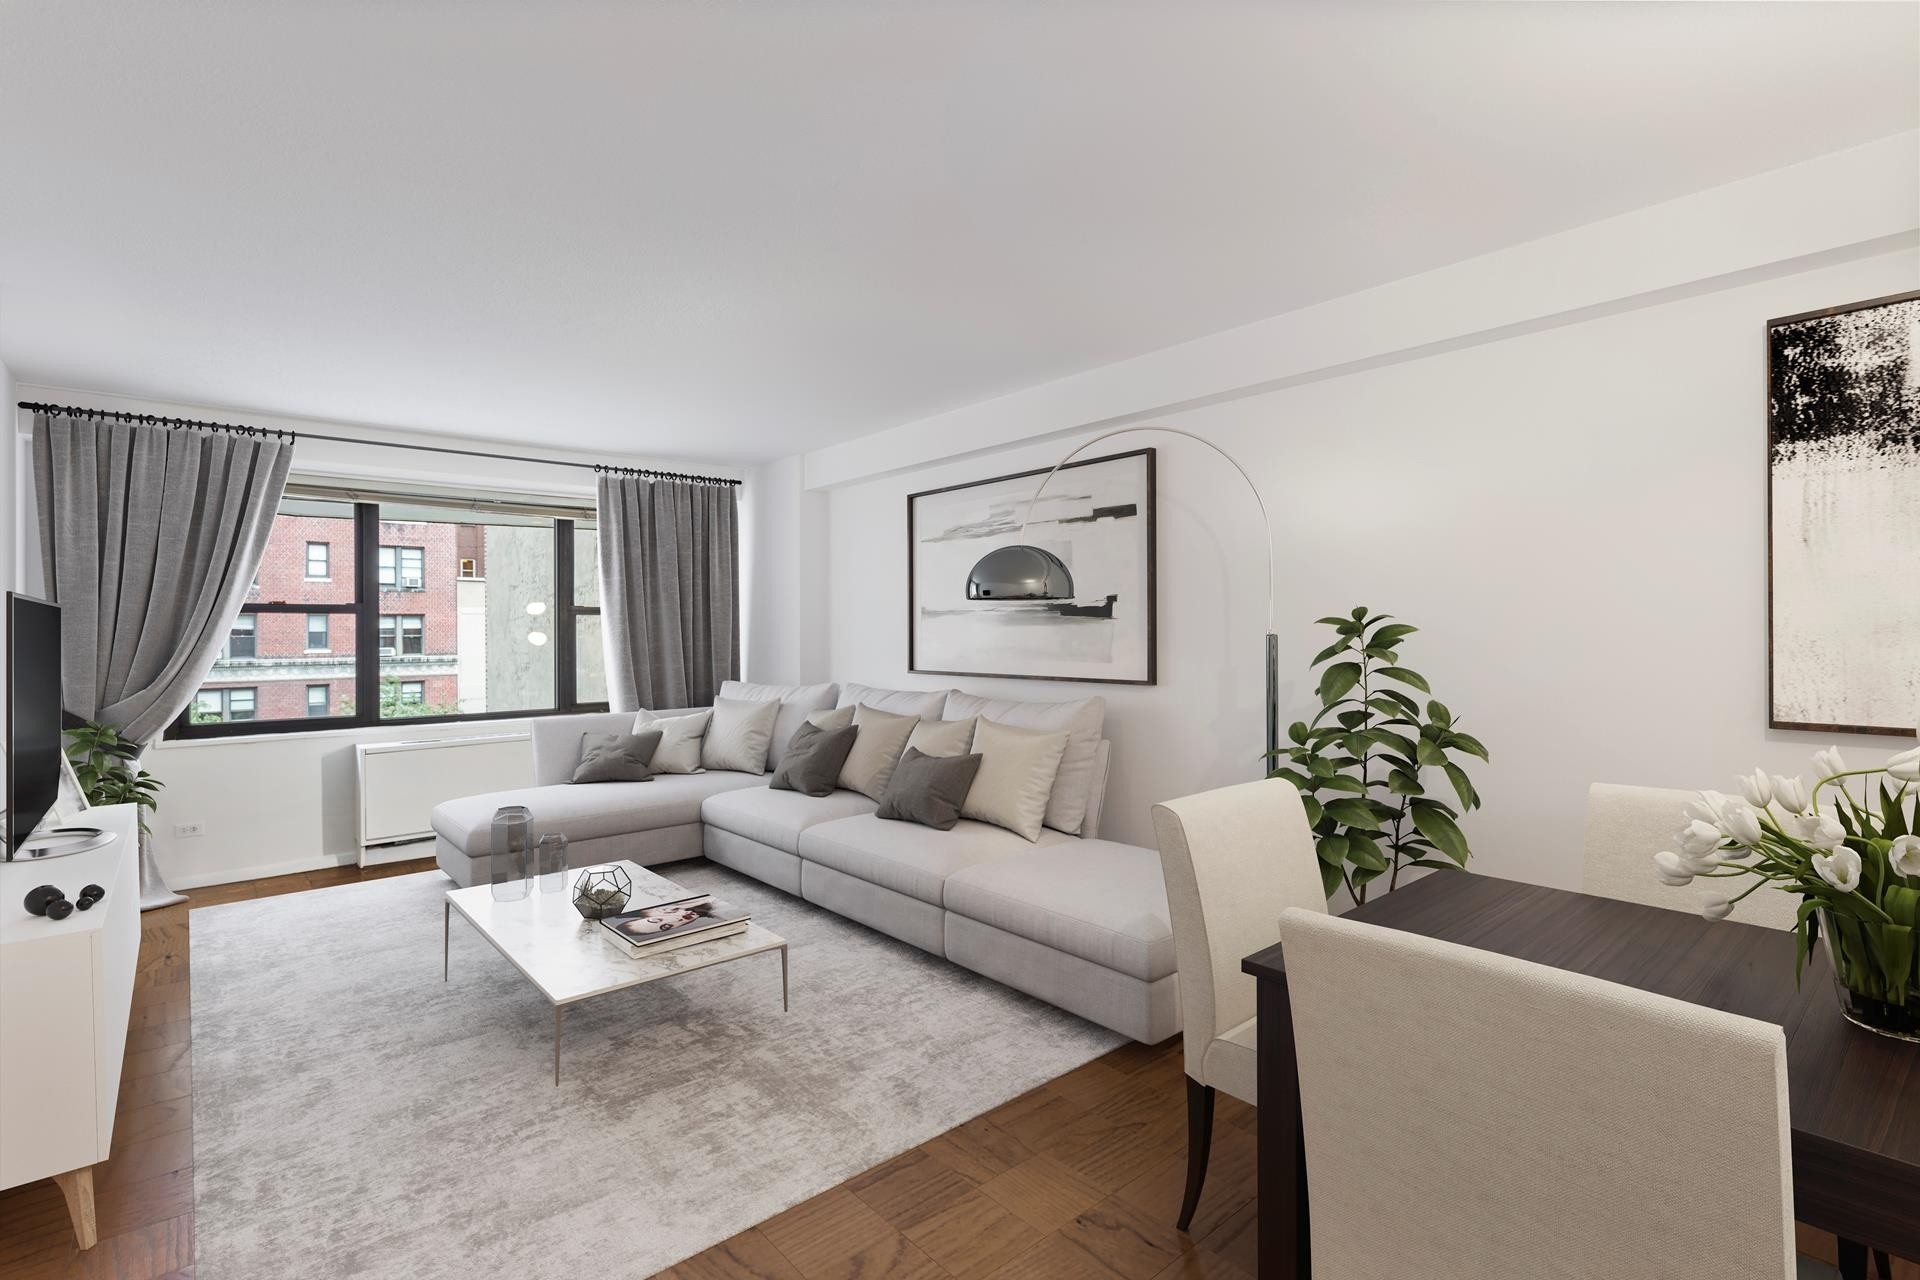 Co-op Properties for Sale at 111 E 85TH ST, 4D Upper East Side, New York, NY 10028